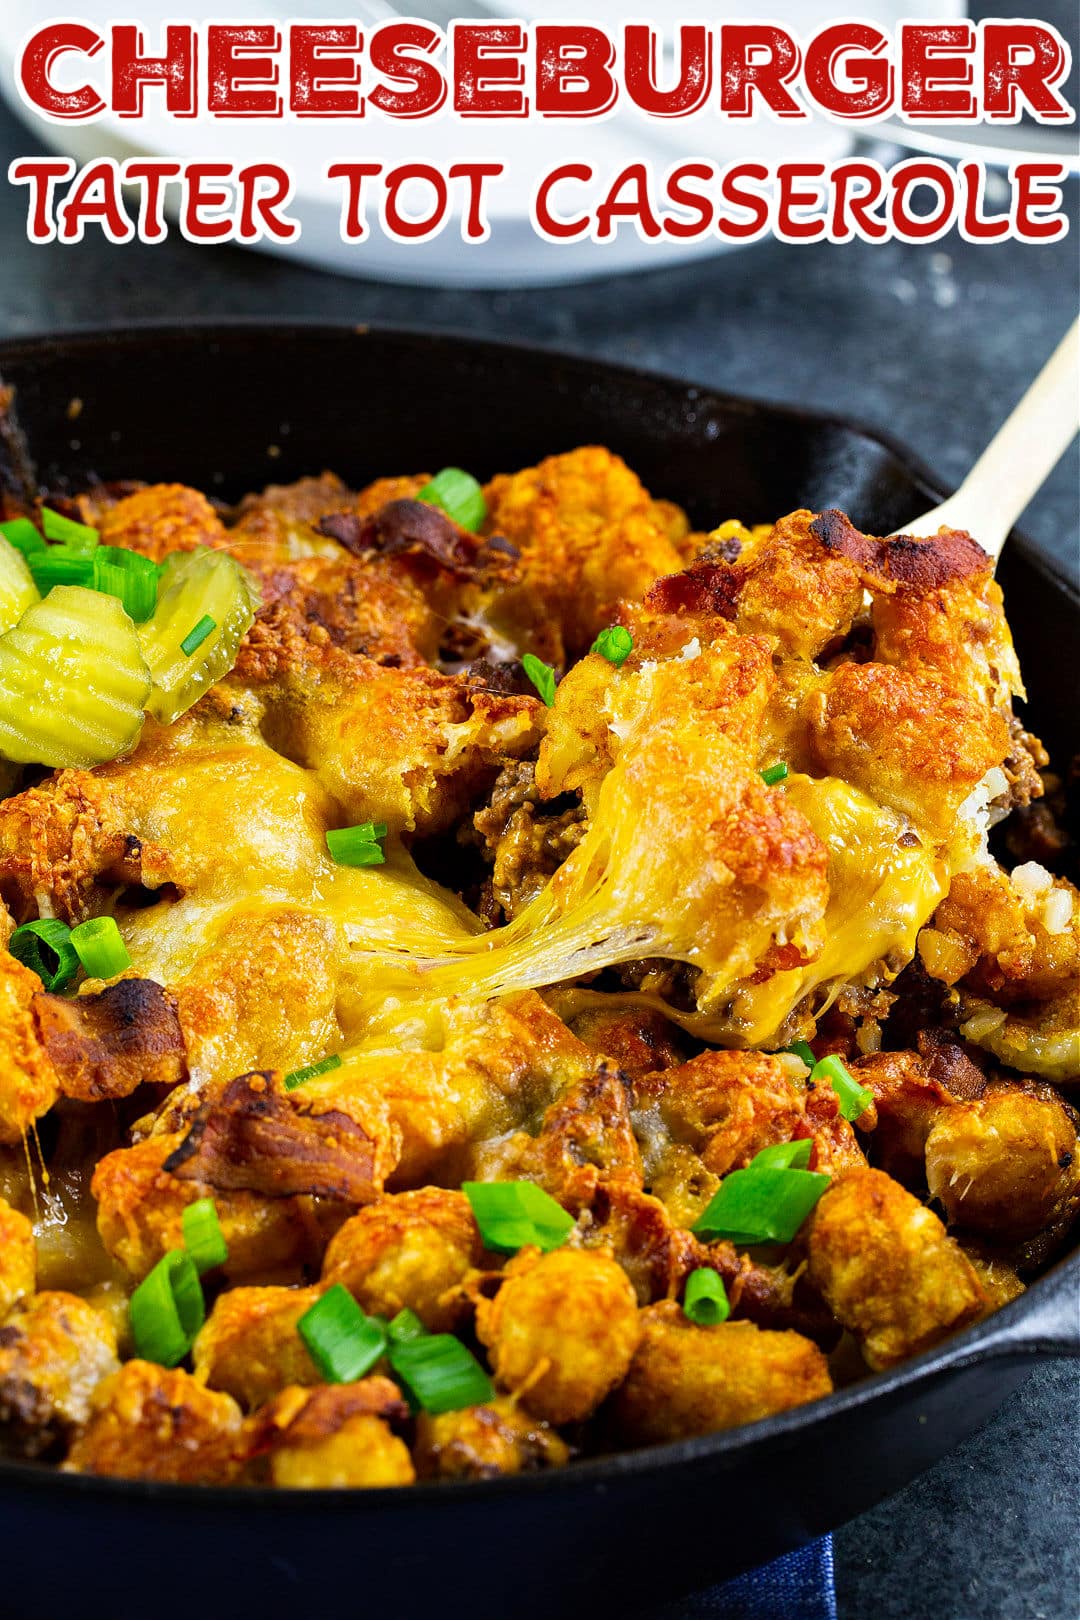 Spoon scooping up Cheeseburger Tater Tot Casserole.